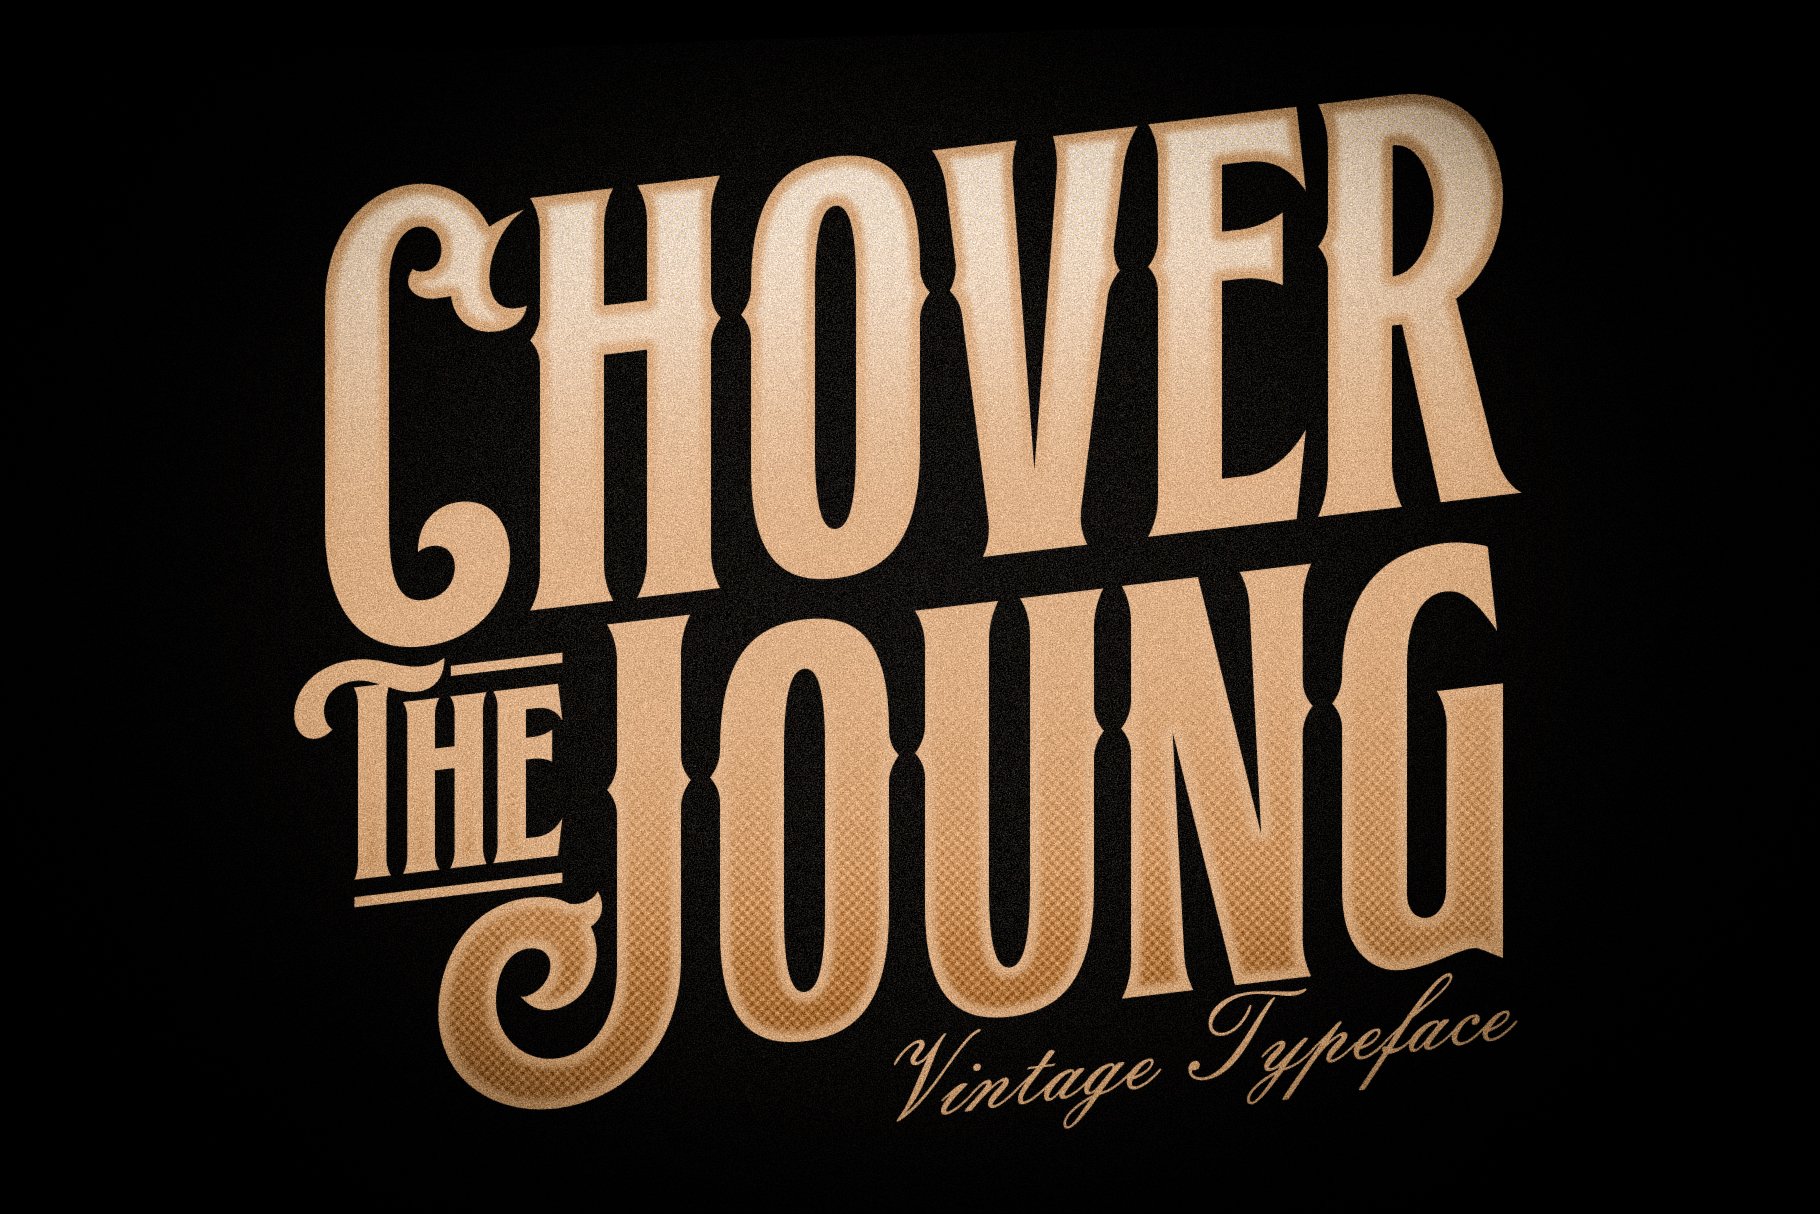 Chover the Joung cover image.